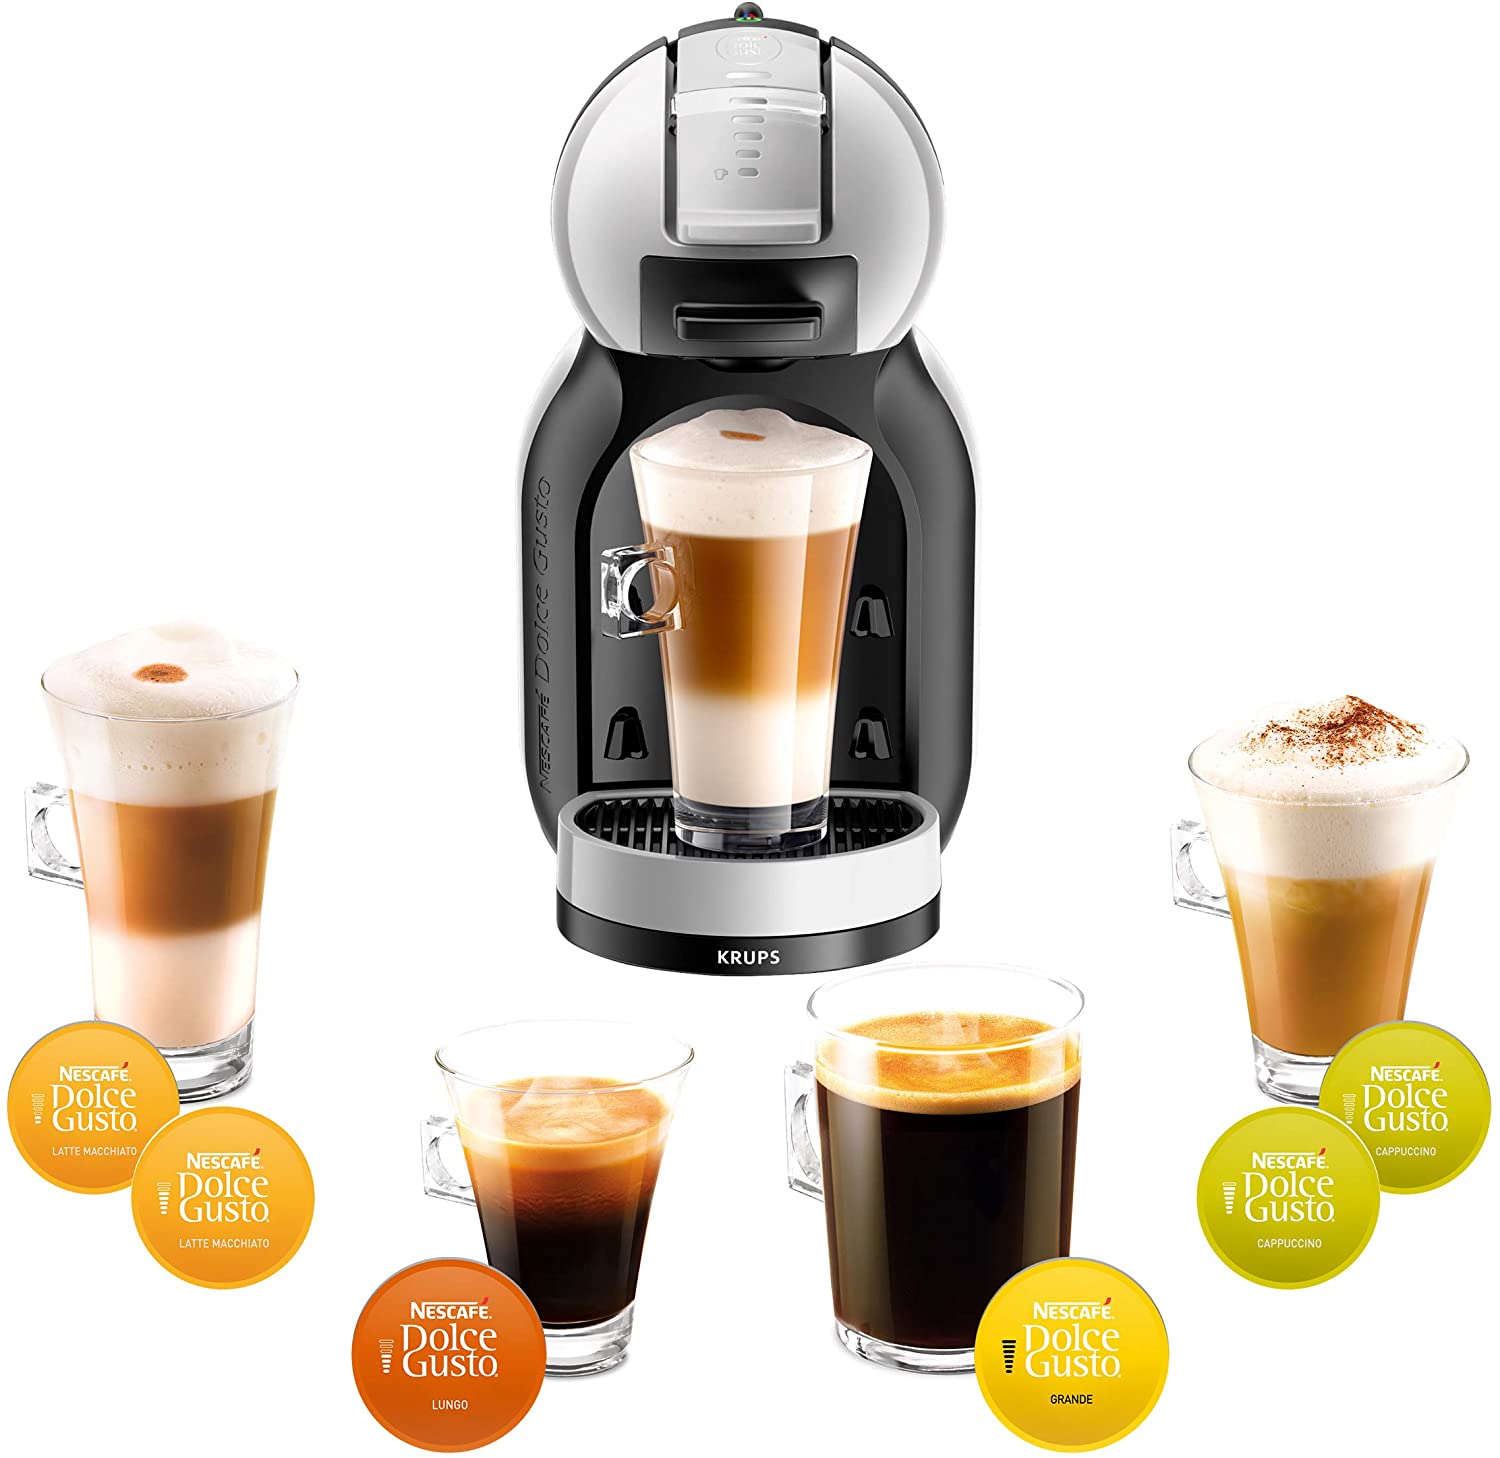 MACHINE A CAFE DOLCE GUSTO CAPSUL KP 123 B10